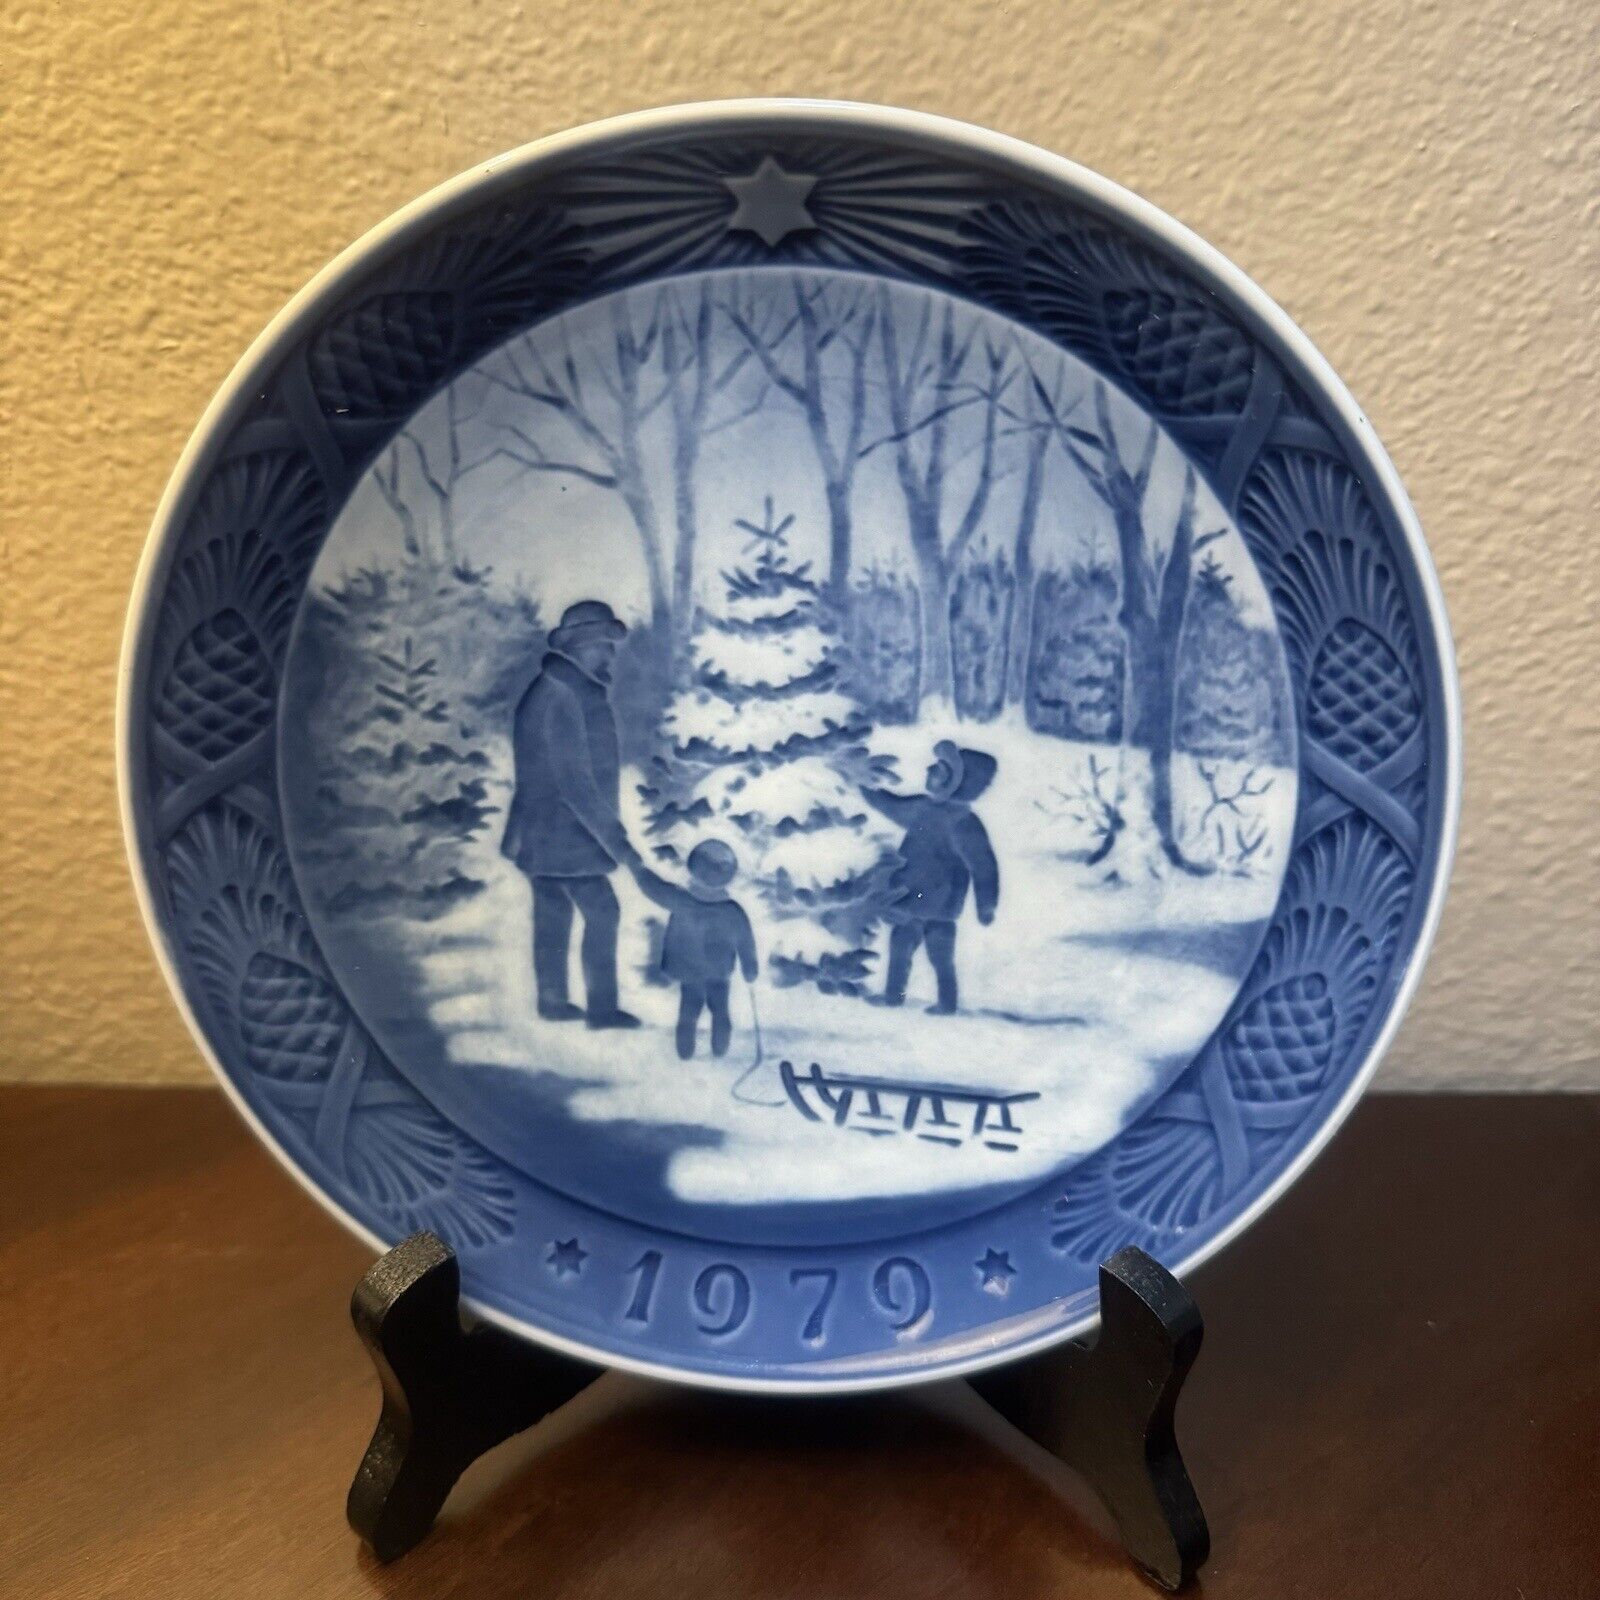 Vintage 1979 Royal Copenhagen ”choose Tree\'\' annual Christmas collection plate